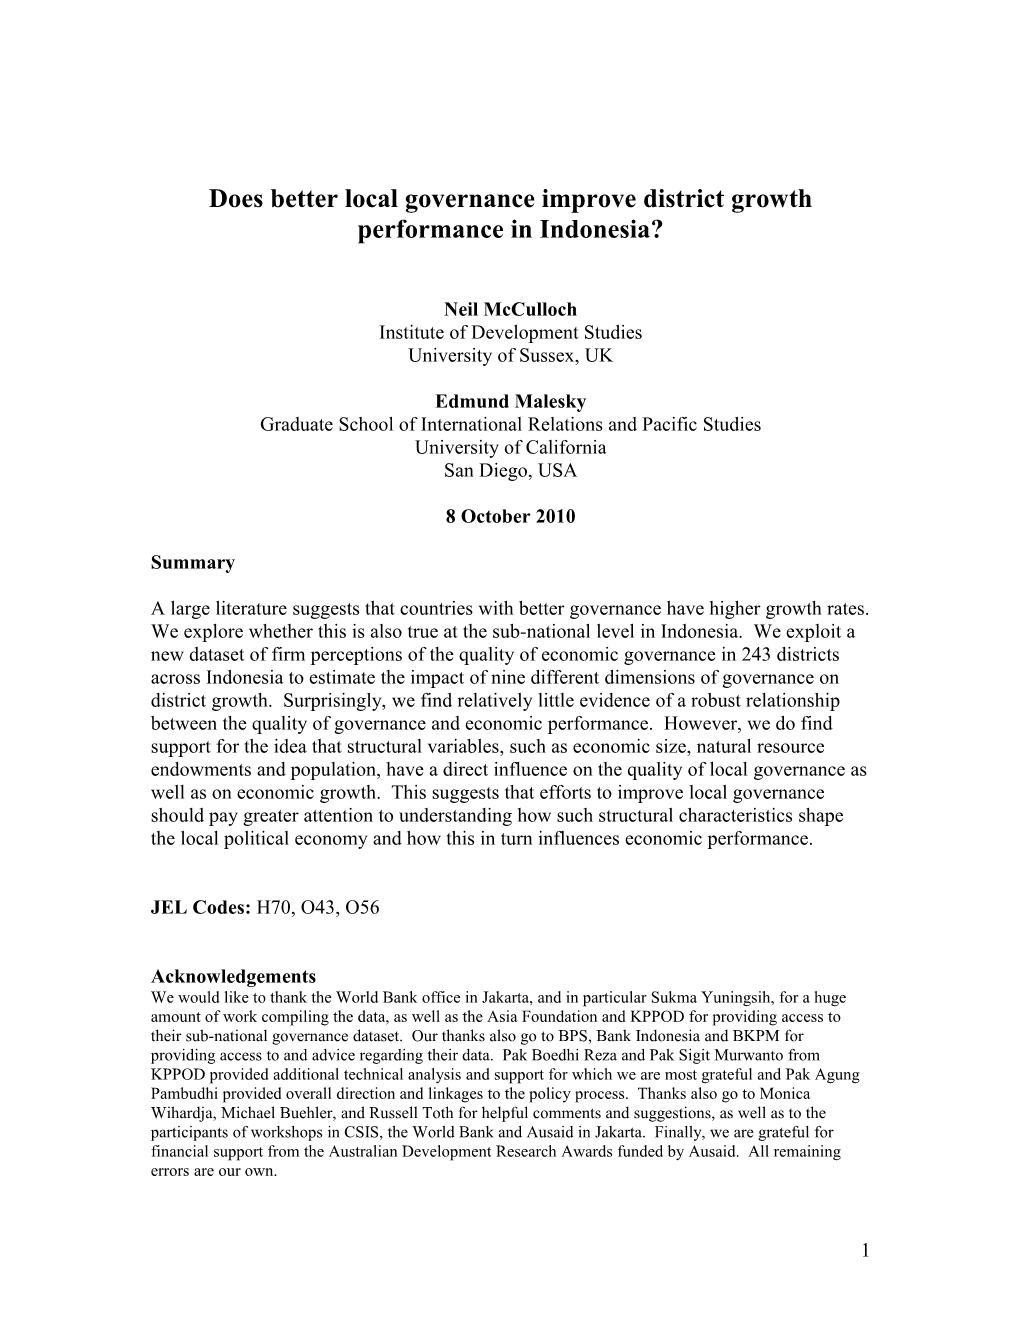 Does Better Local Governance Improve District Growth Performance in Indonesia